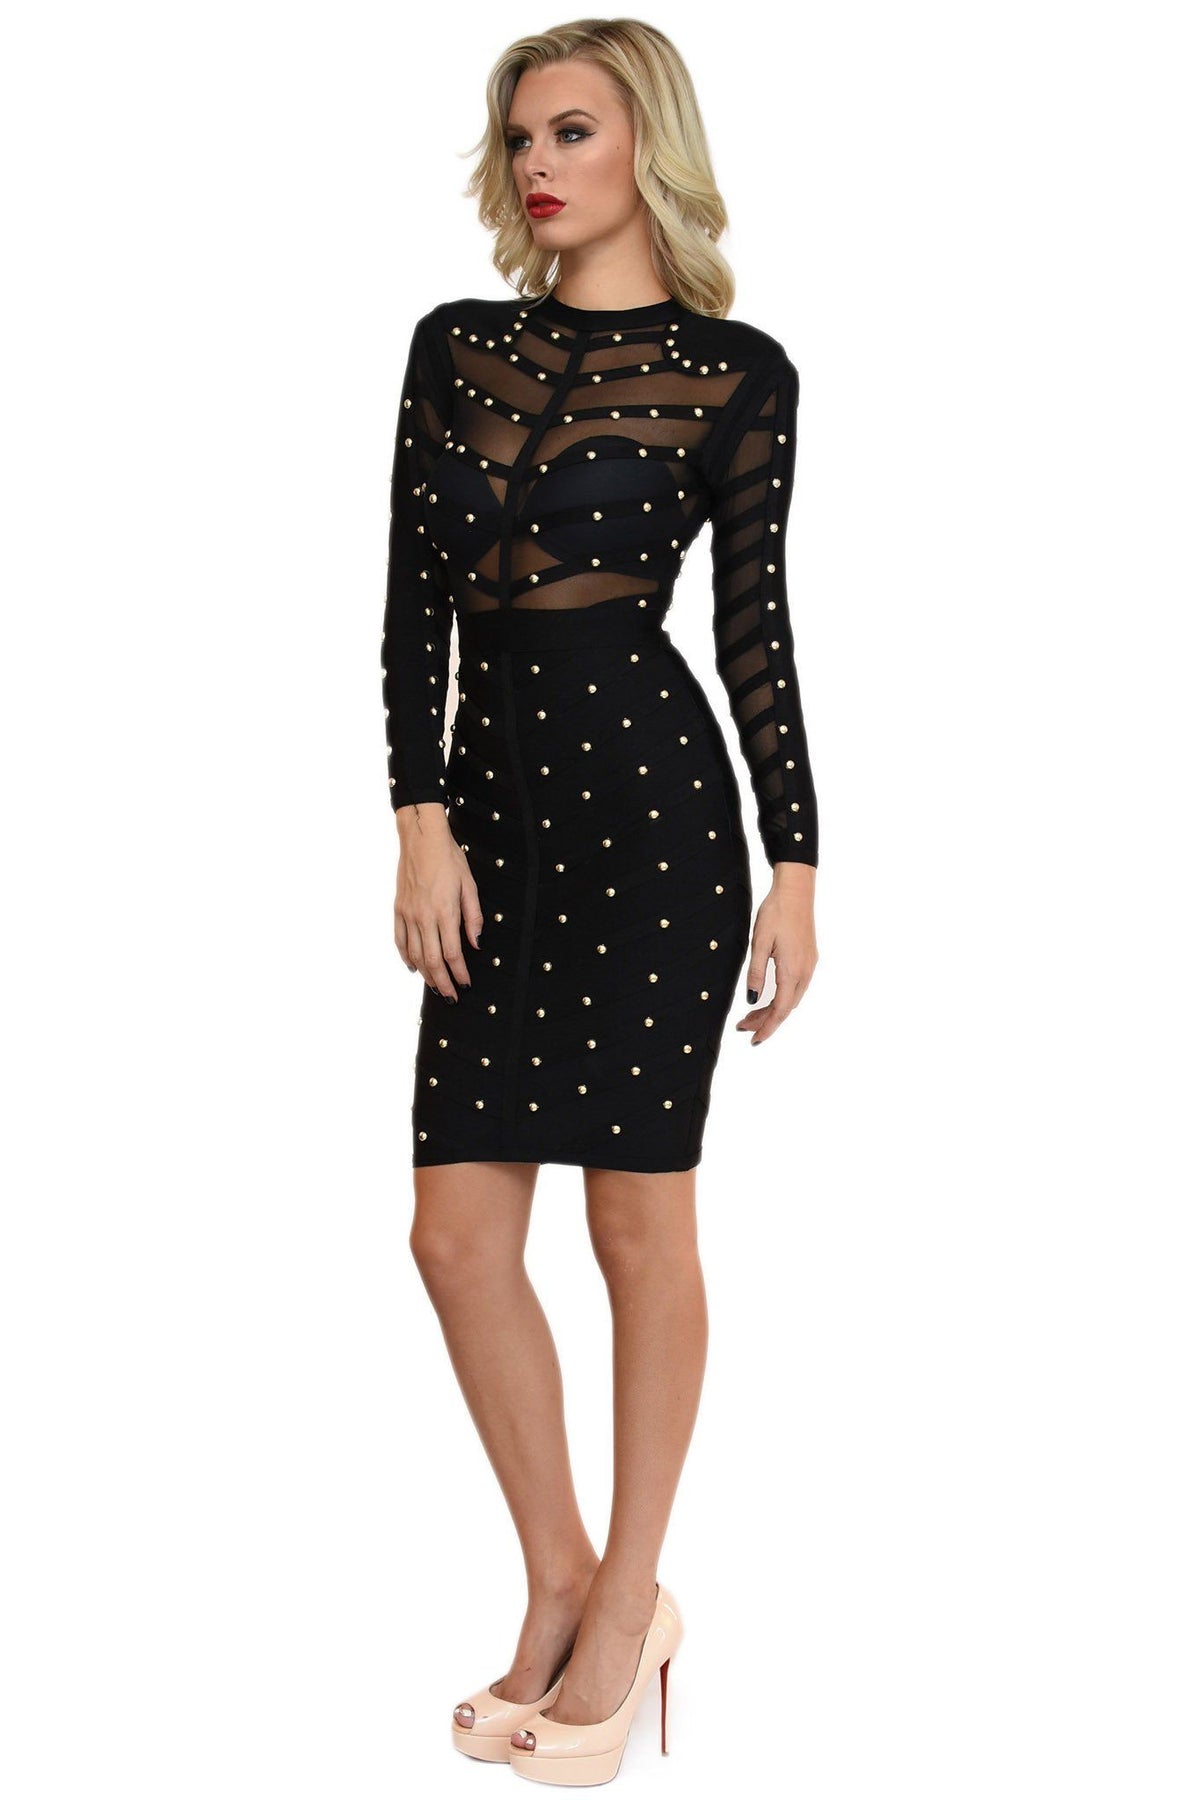 Side of black long sleeve midi bandage dress featuring gold beading details and sheer mesh